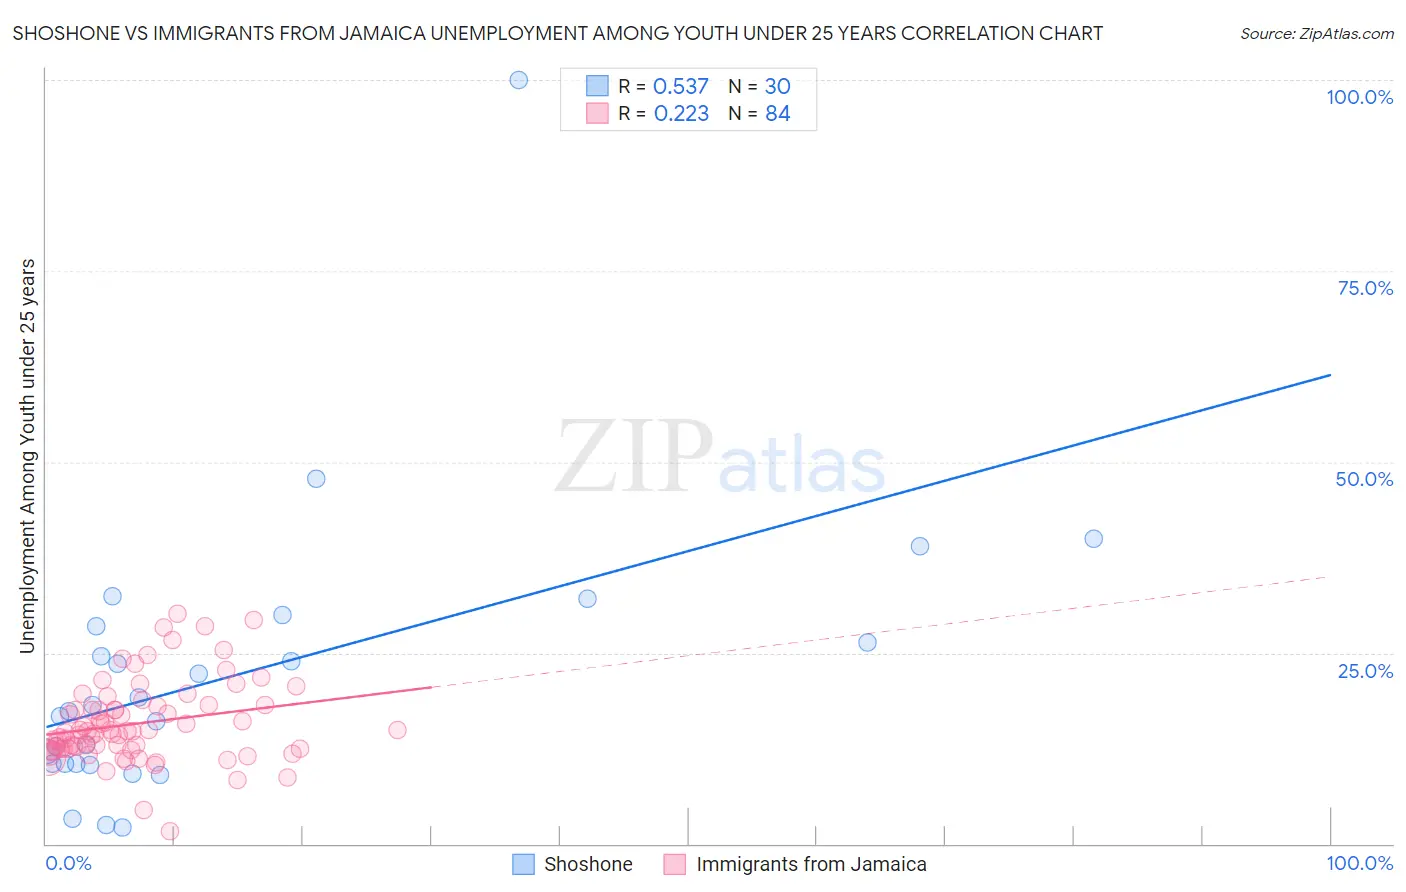 Shoshone vs Immigrants from Jamaica Unemployment Among Youth under 25 years